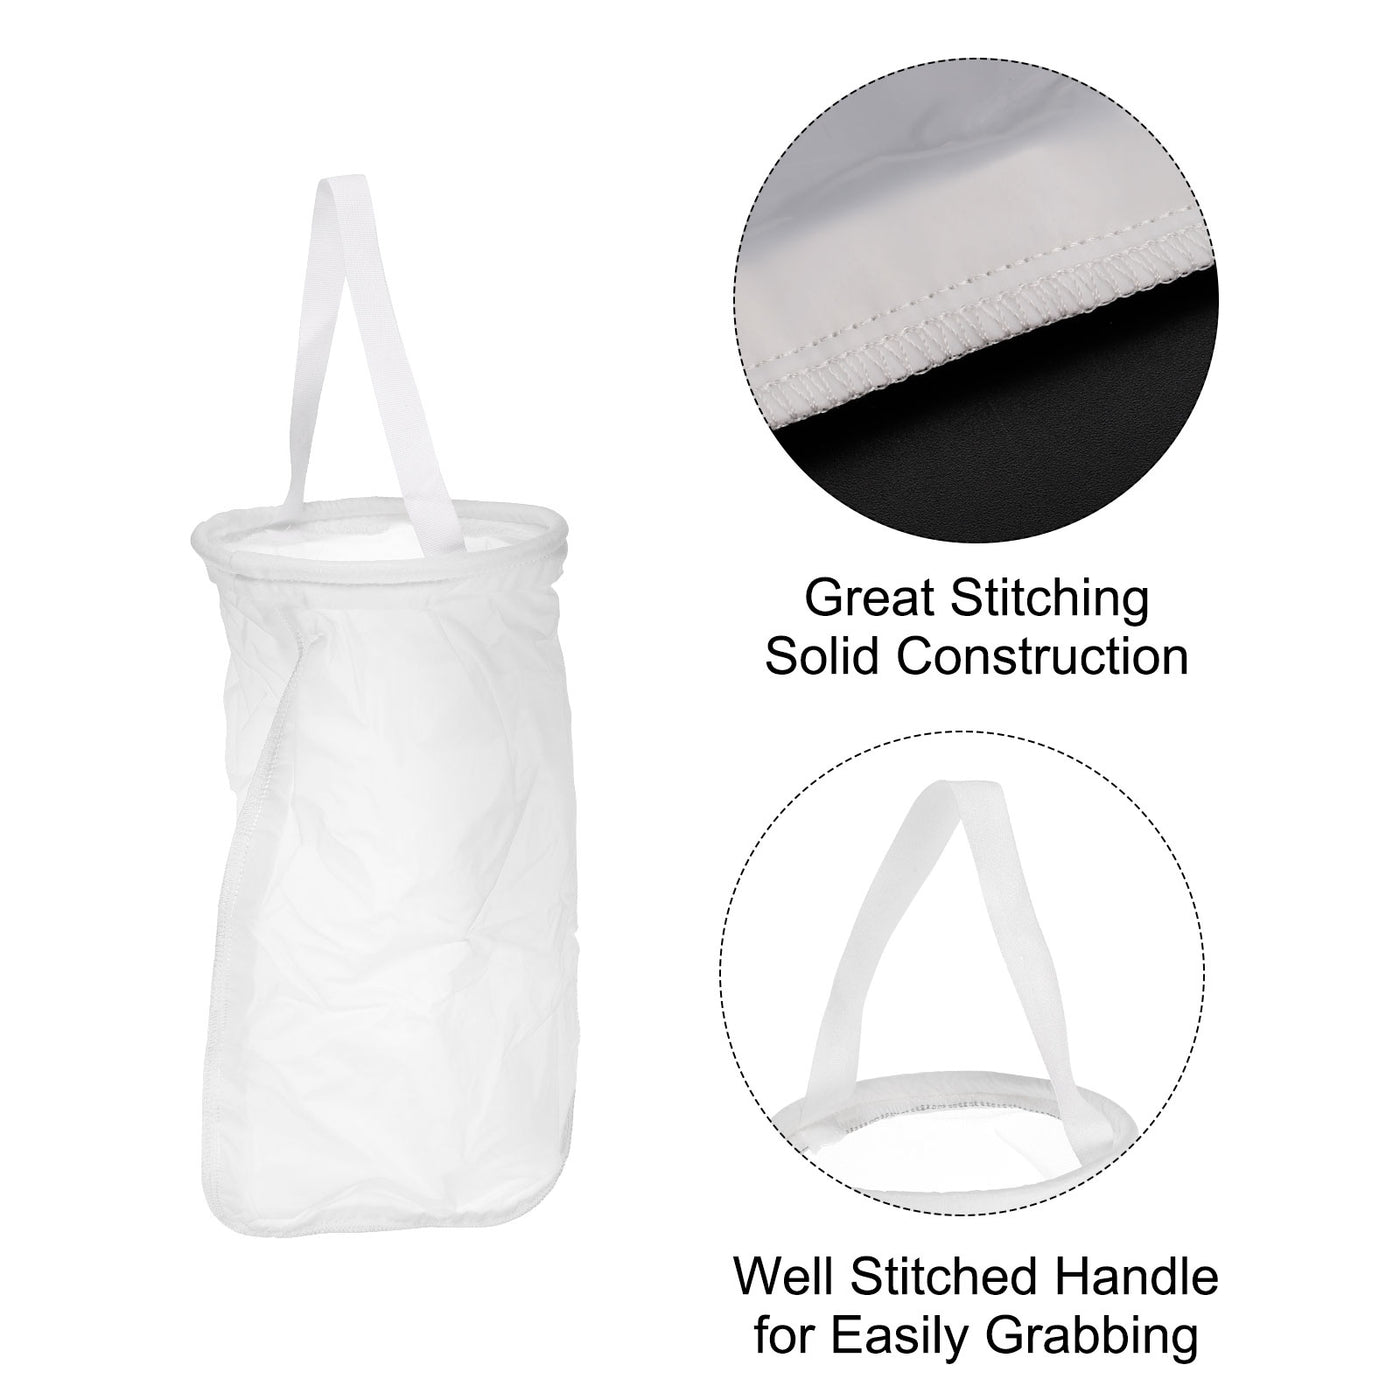 uxcell Uxcell Paint Filter Bag 500 Mesh (16.9"x7") Nylon Strainer for Filtering Paint